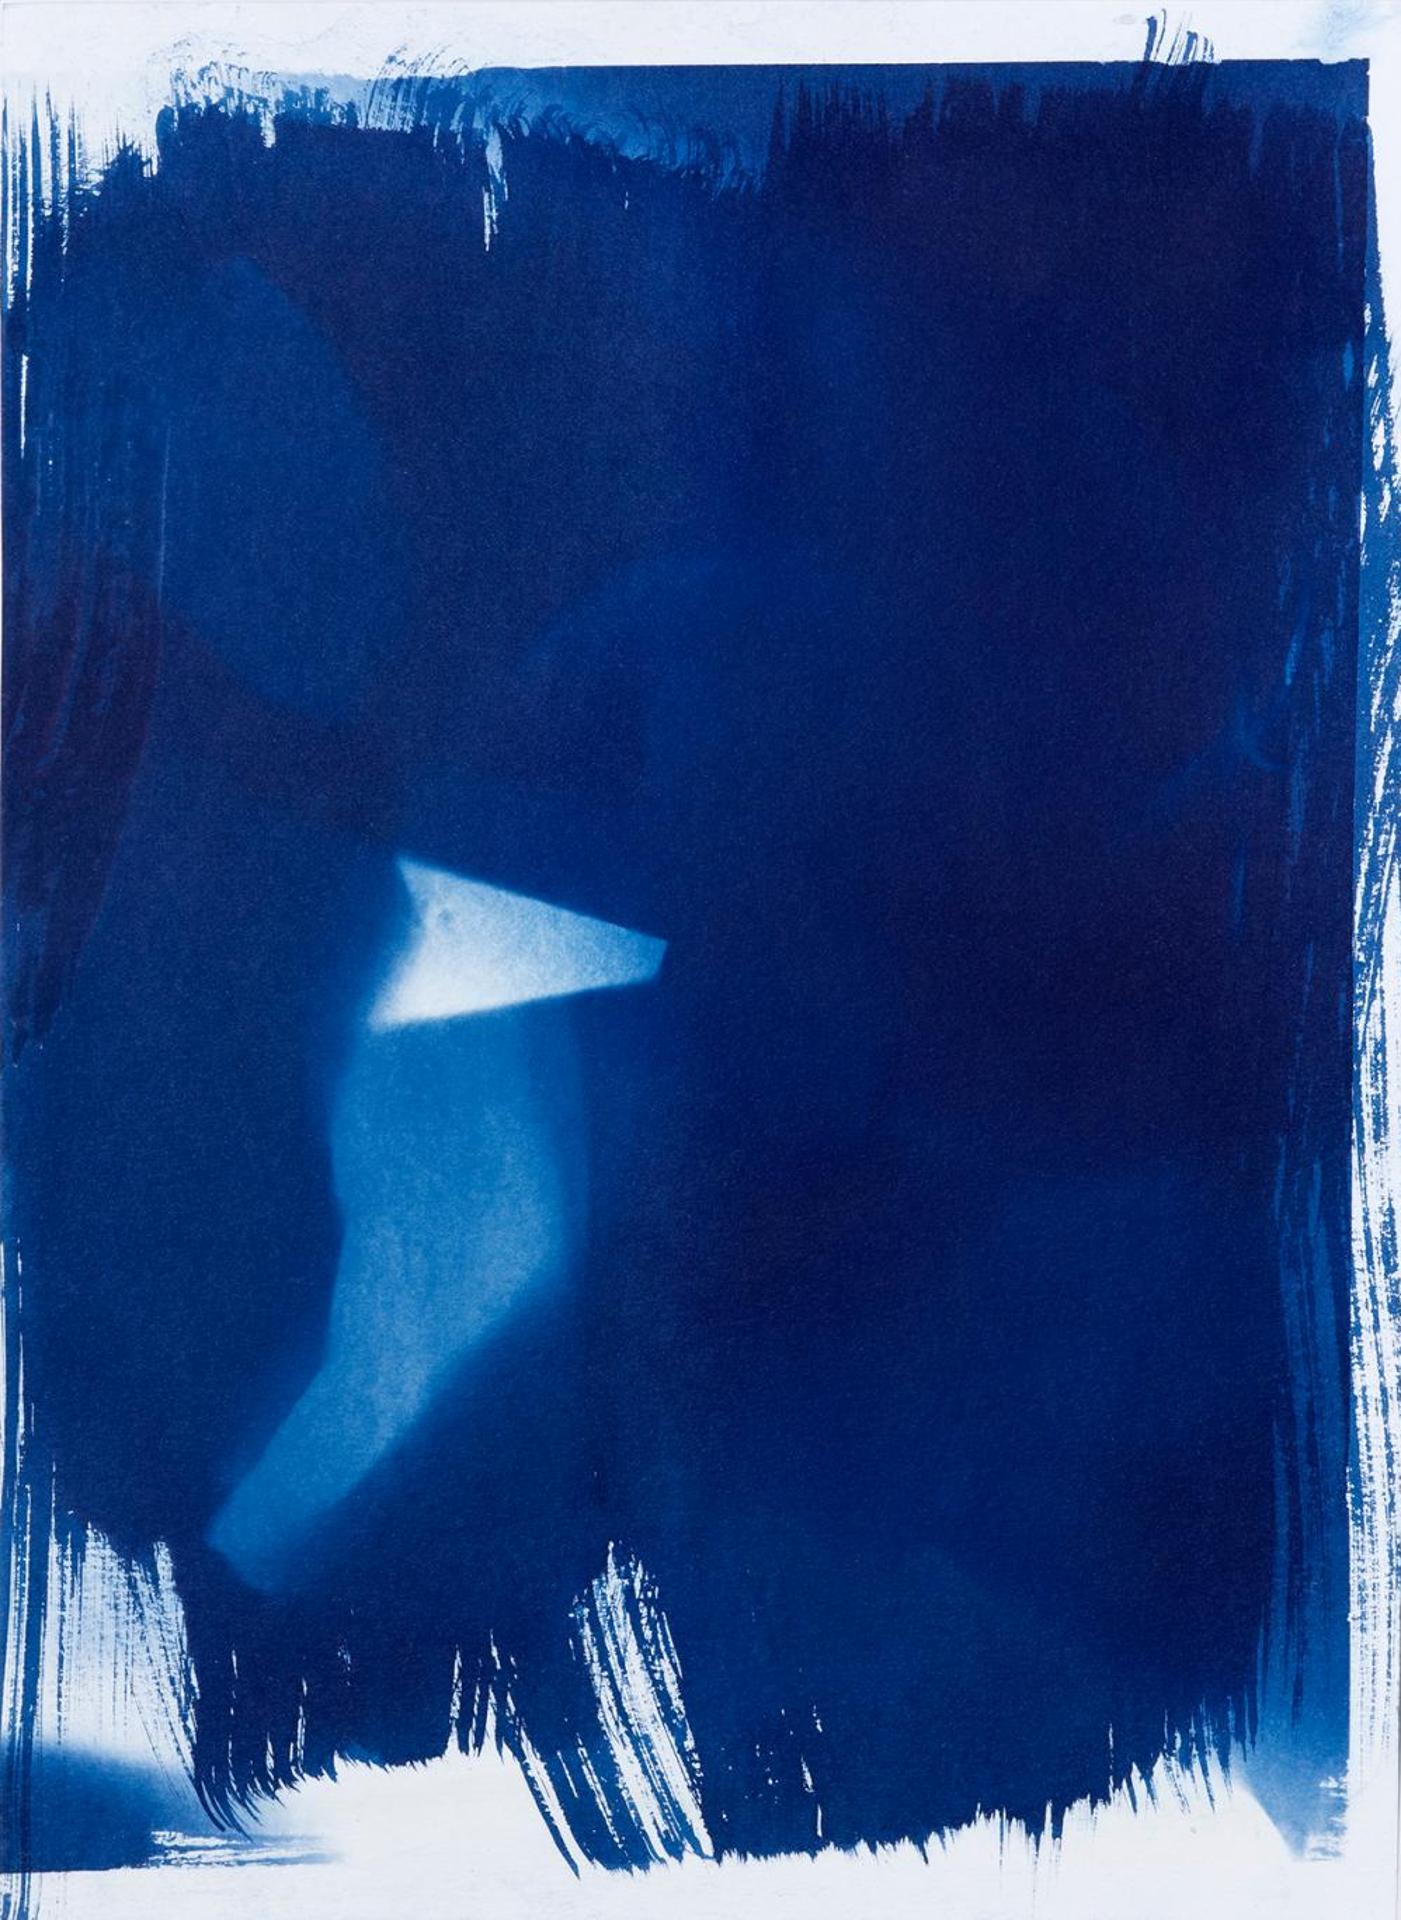 Sheldon Brown (1988) - Untitled - Cyanotype with Triangle